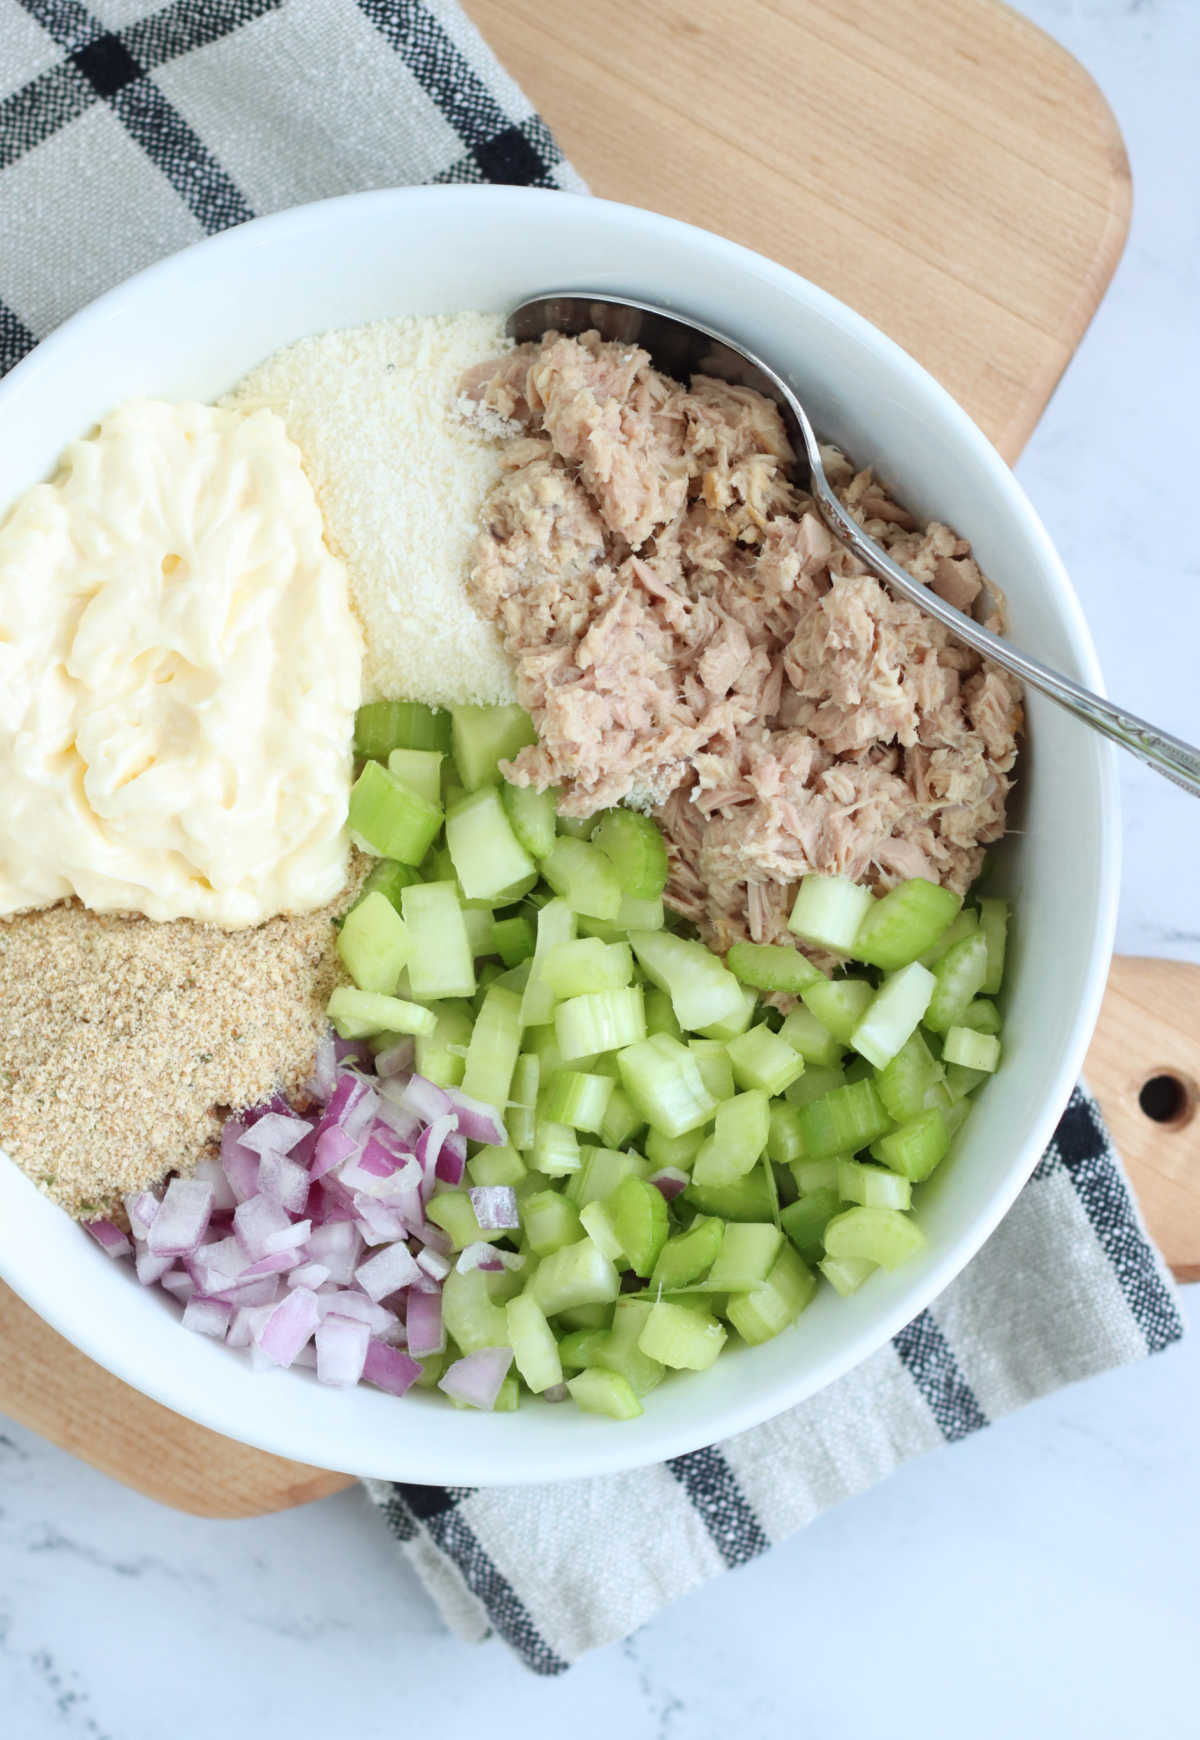 Small white bowl with chopped celery, red onion, mayonnaise, bread crumbs and tuna.